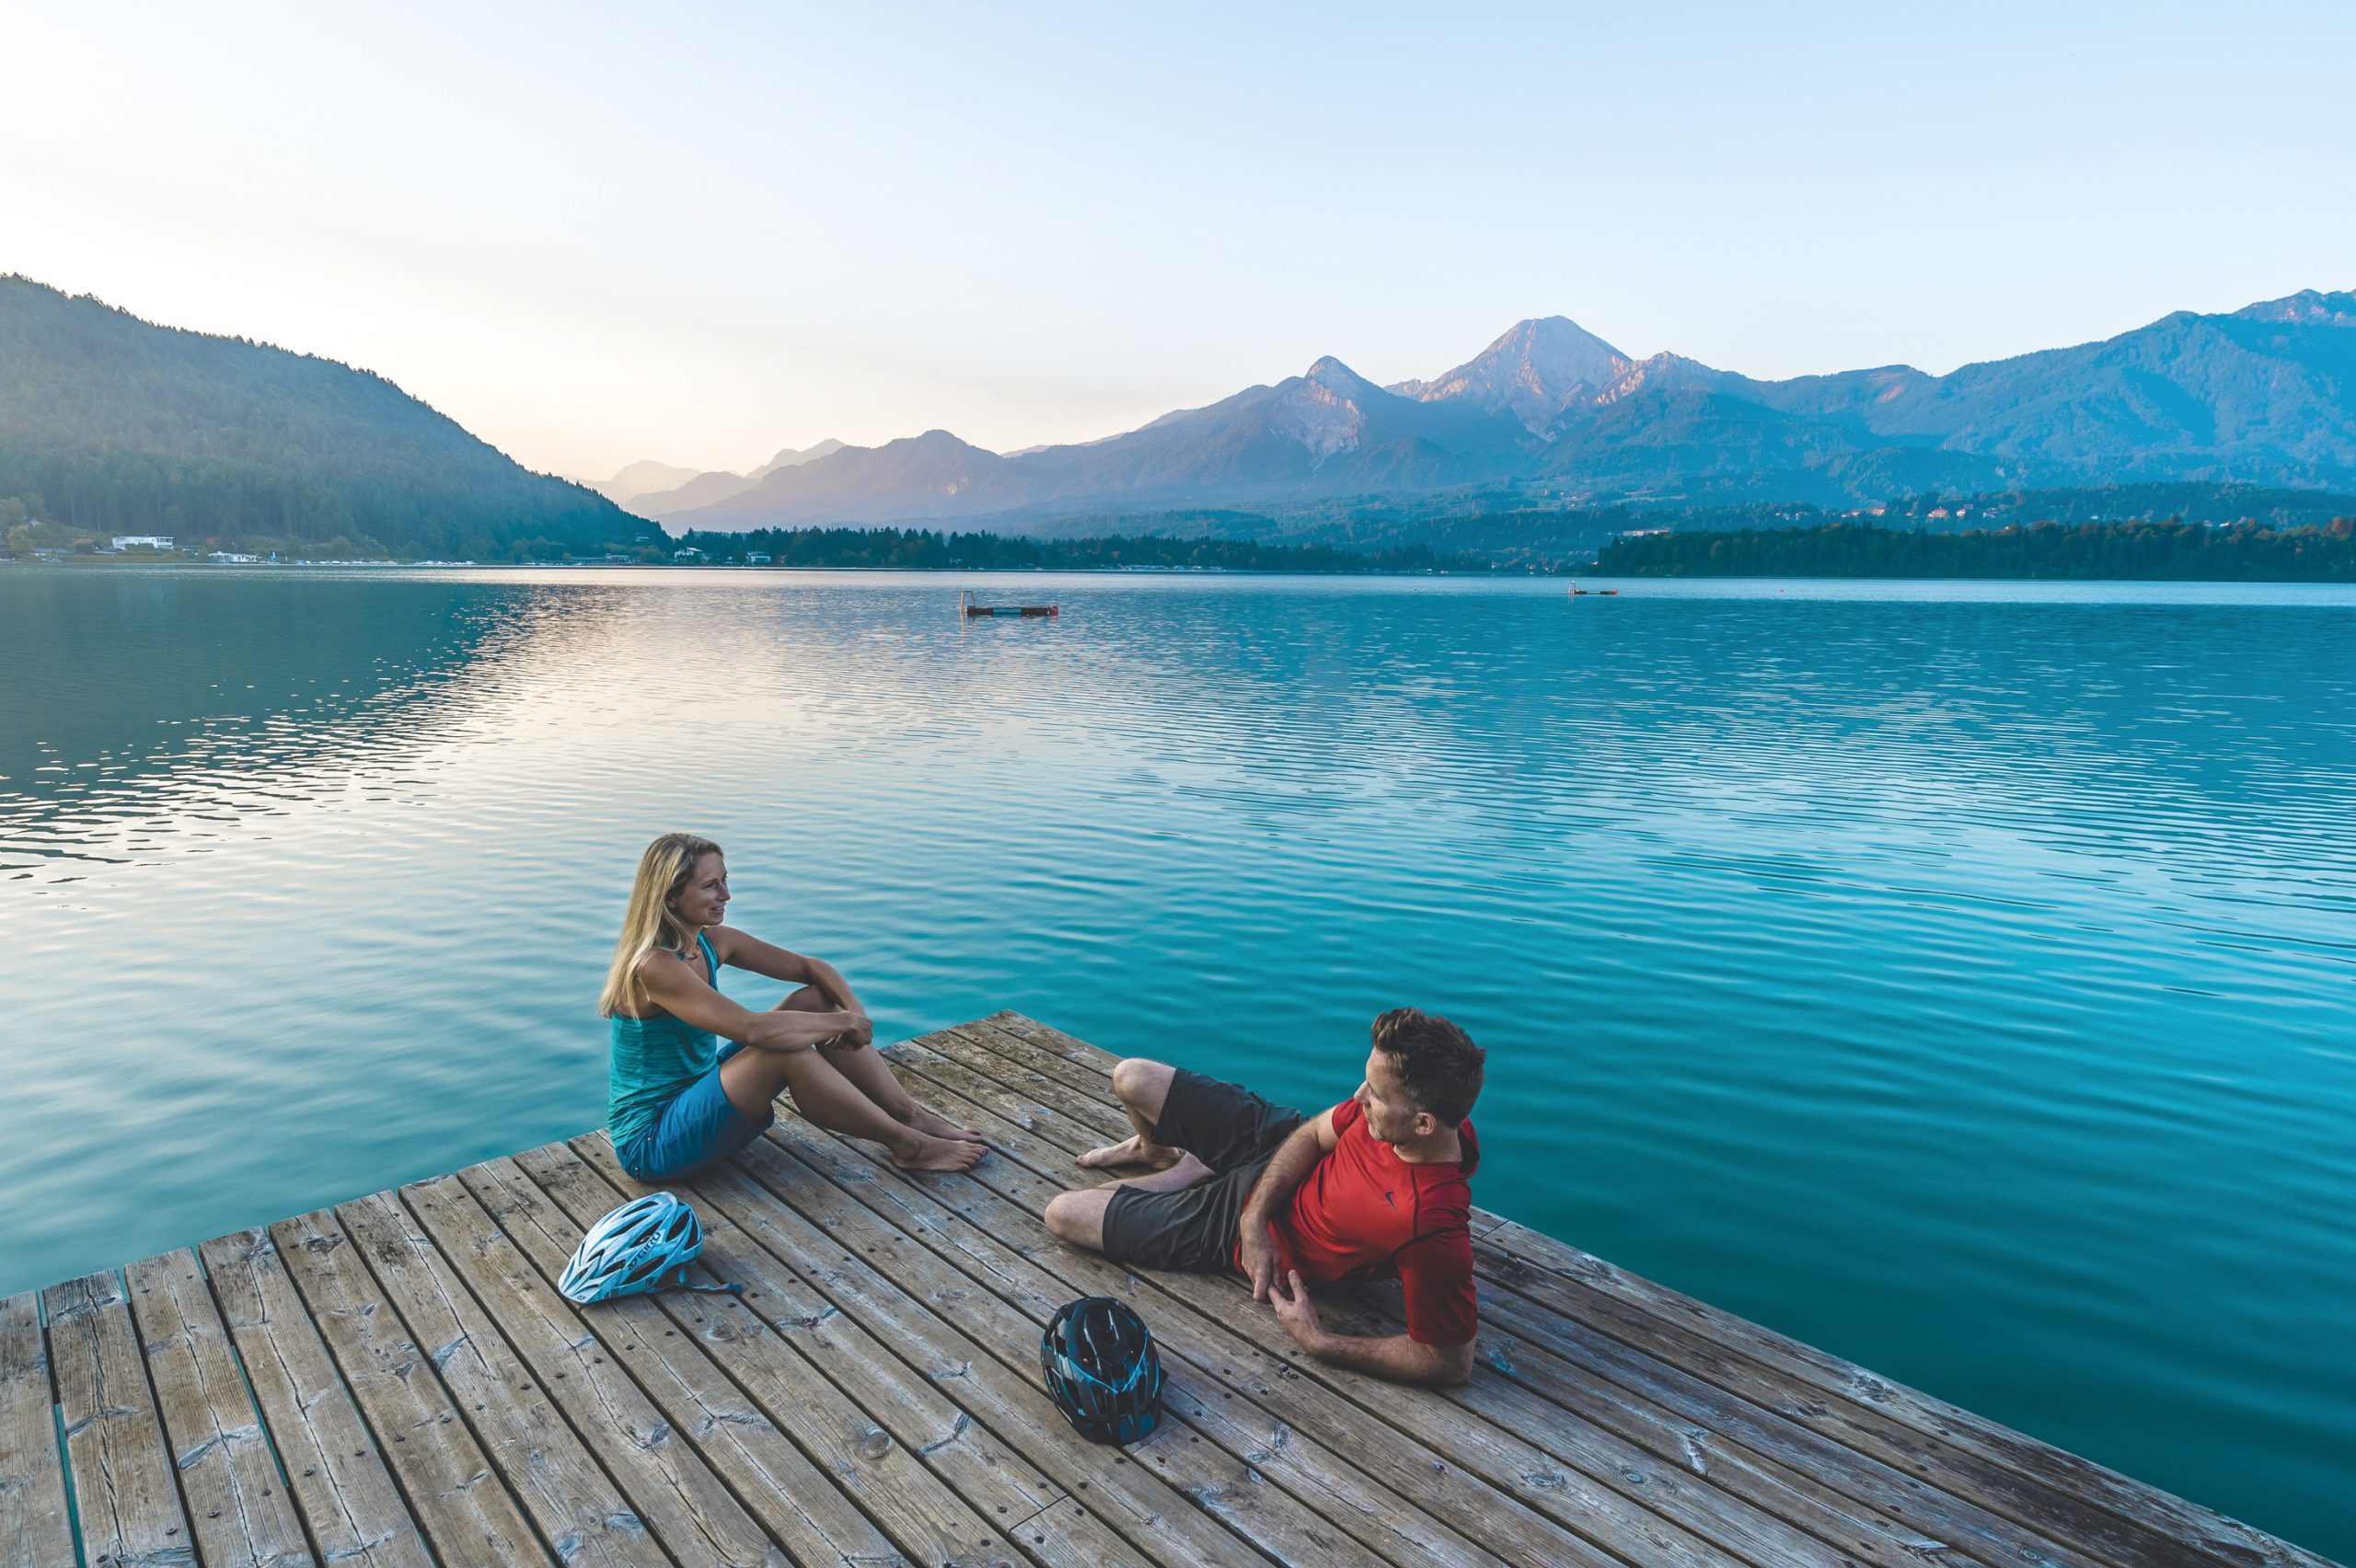 Explore the turquoise Faakersee in Carinthia by bike - an unforgettable experience